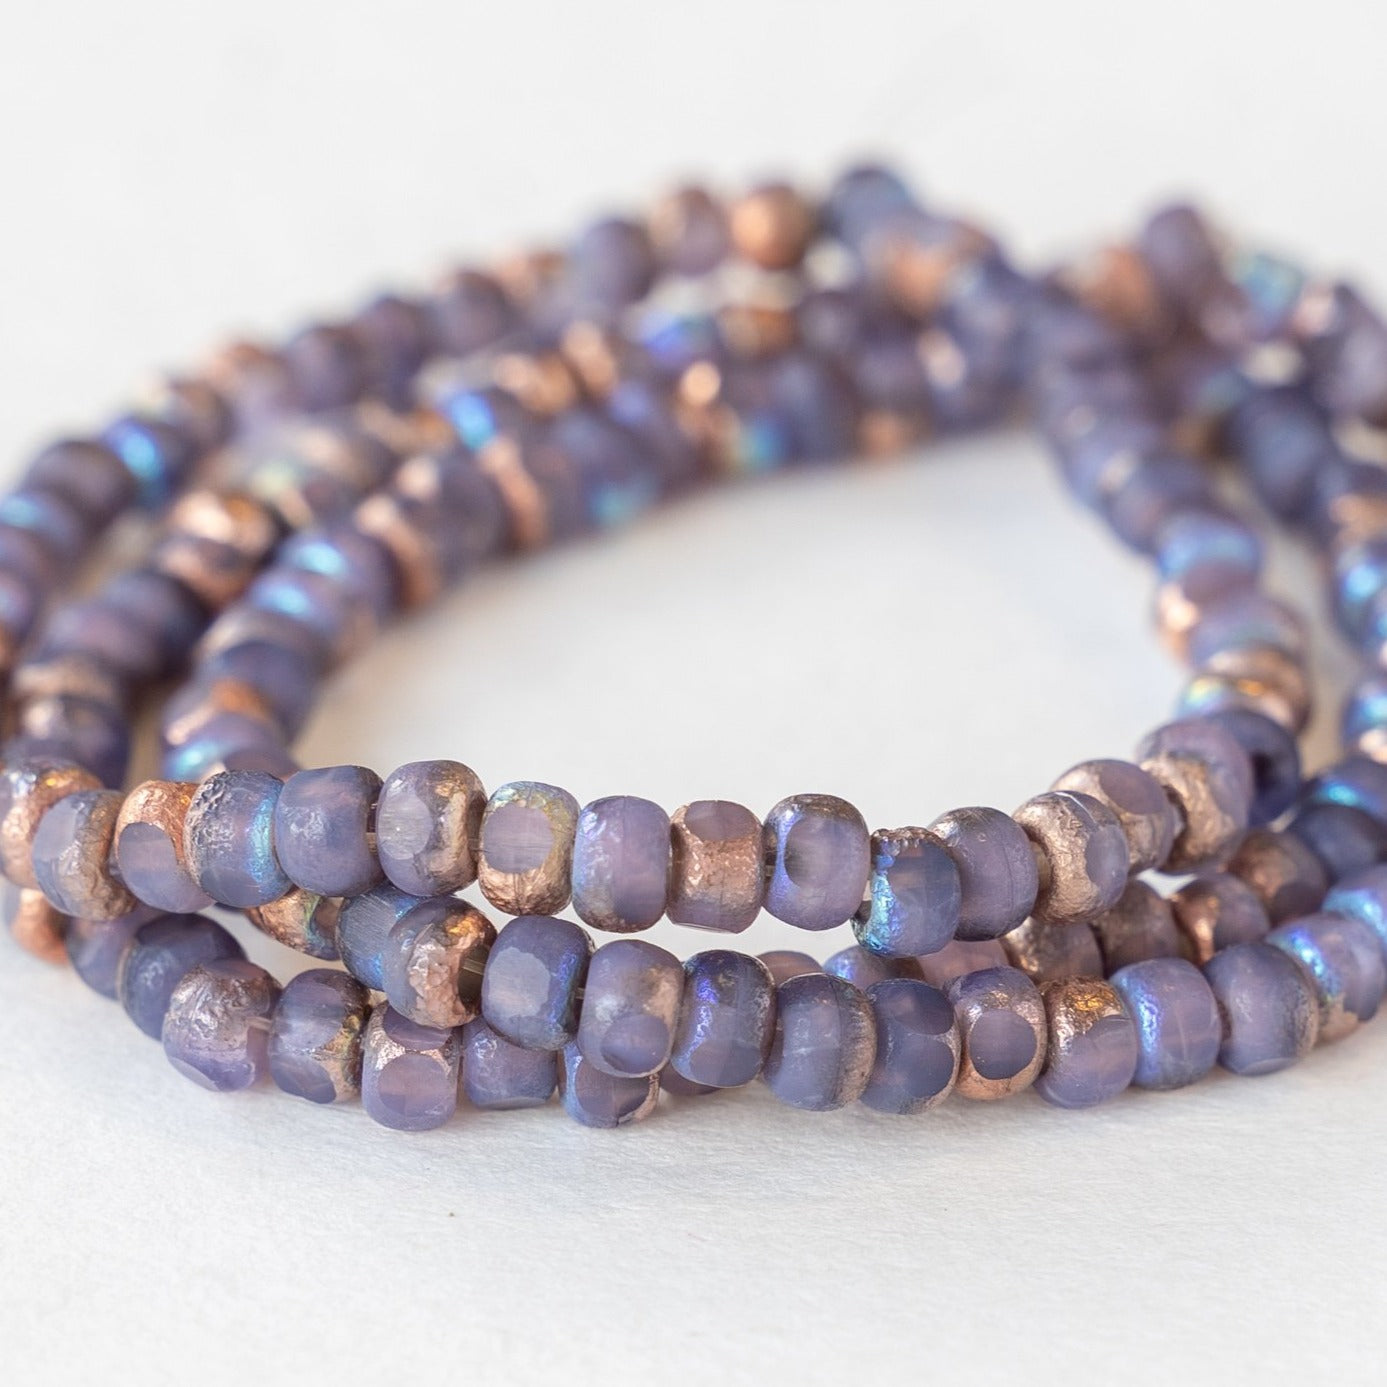 6/0 Tri-cut Seed Beads - Lavender with Etched Bronze - 50